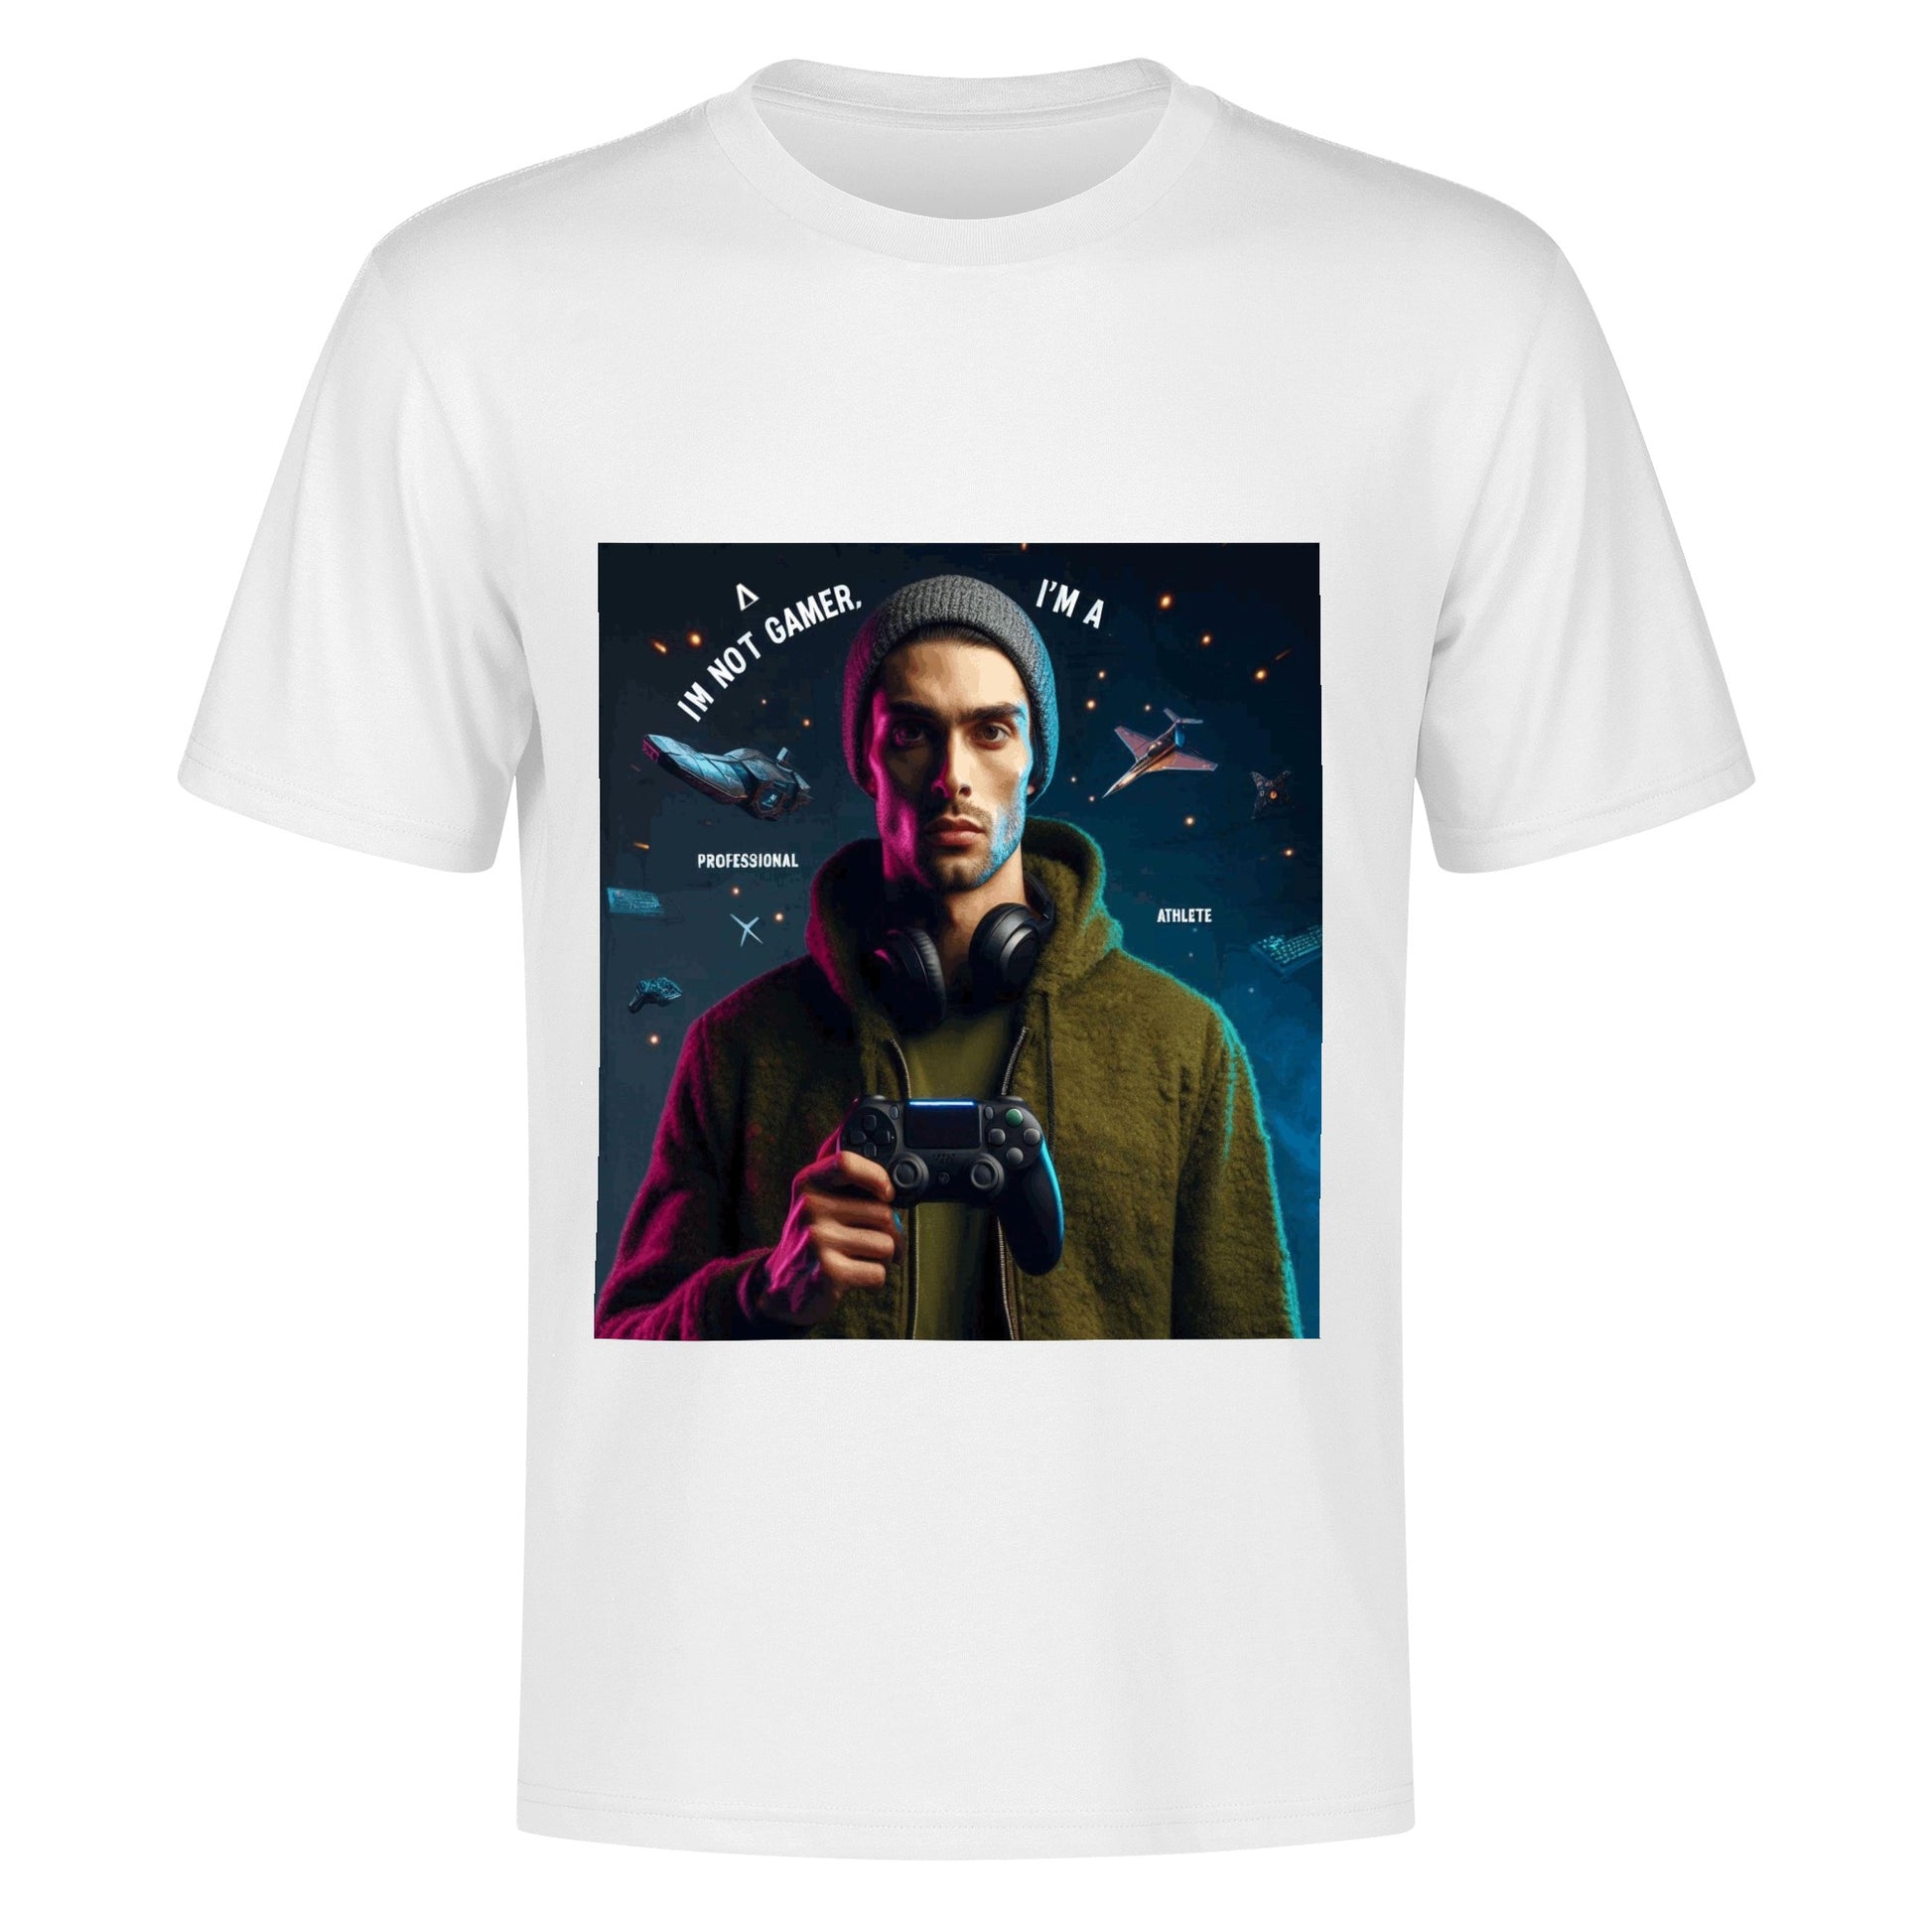 Pro Gamer | Mens Cotton Front Back Printing T Shirt - AGTC